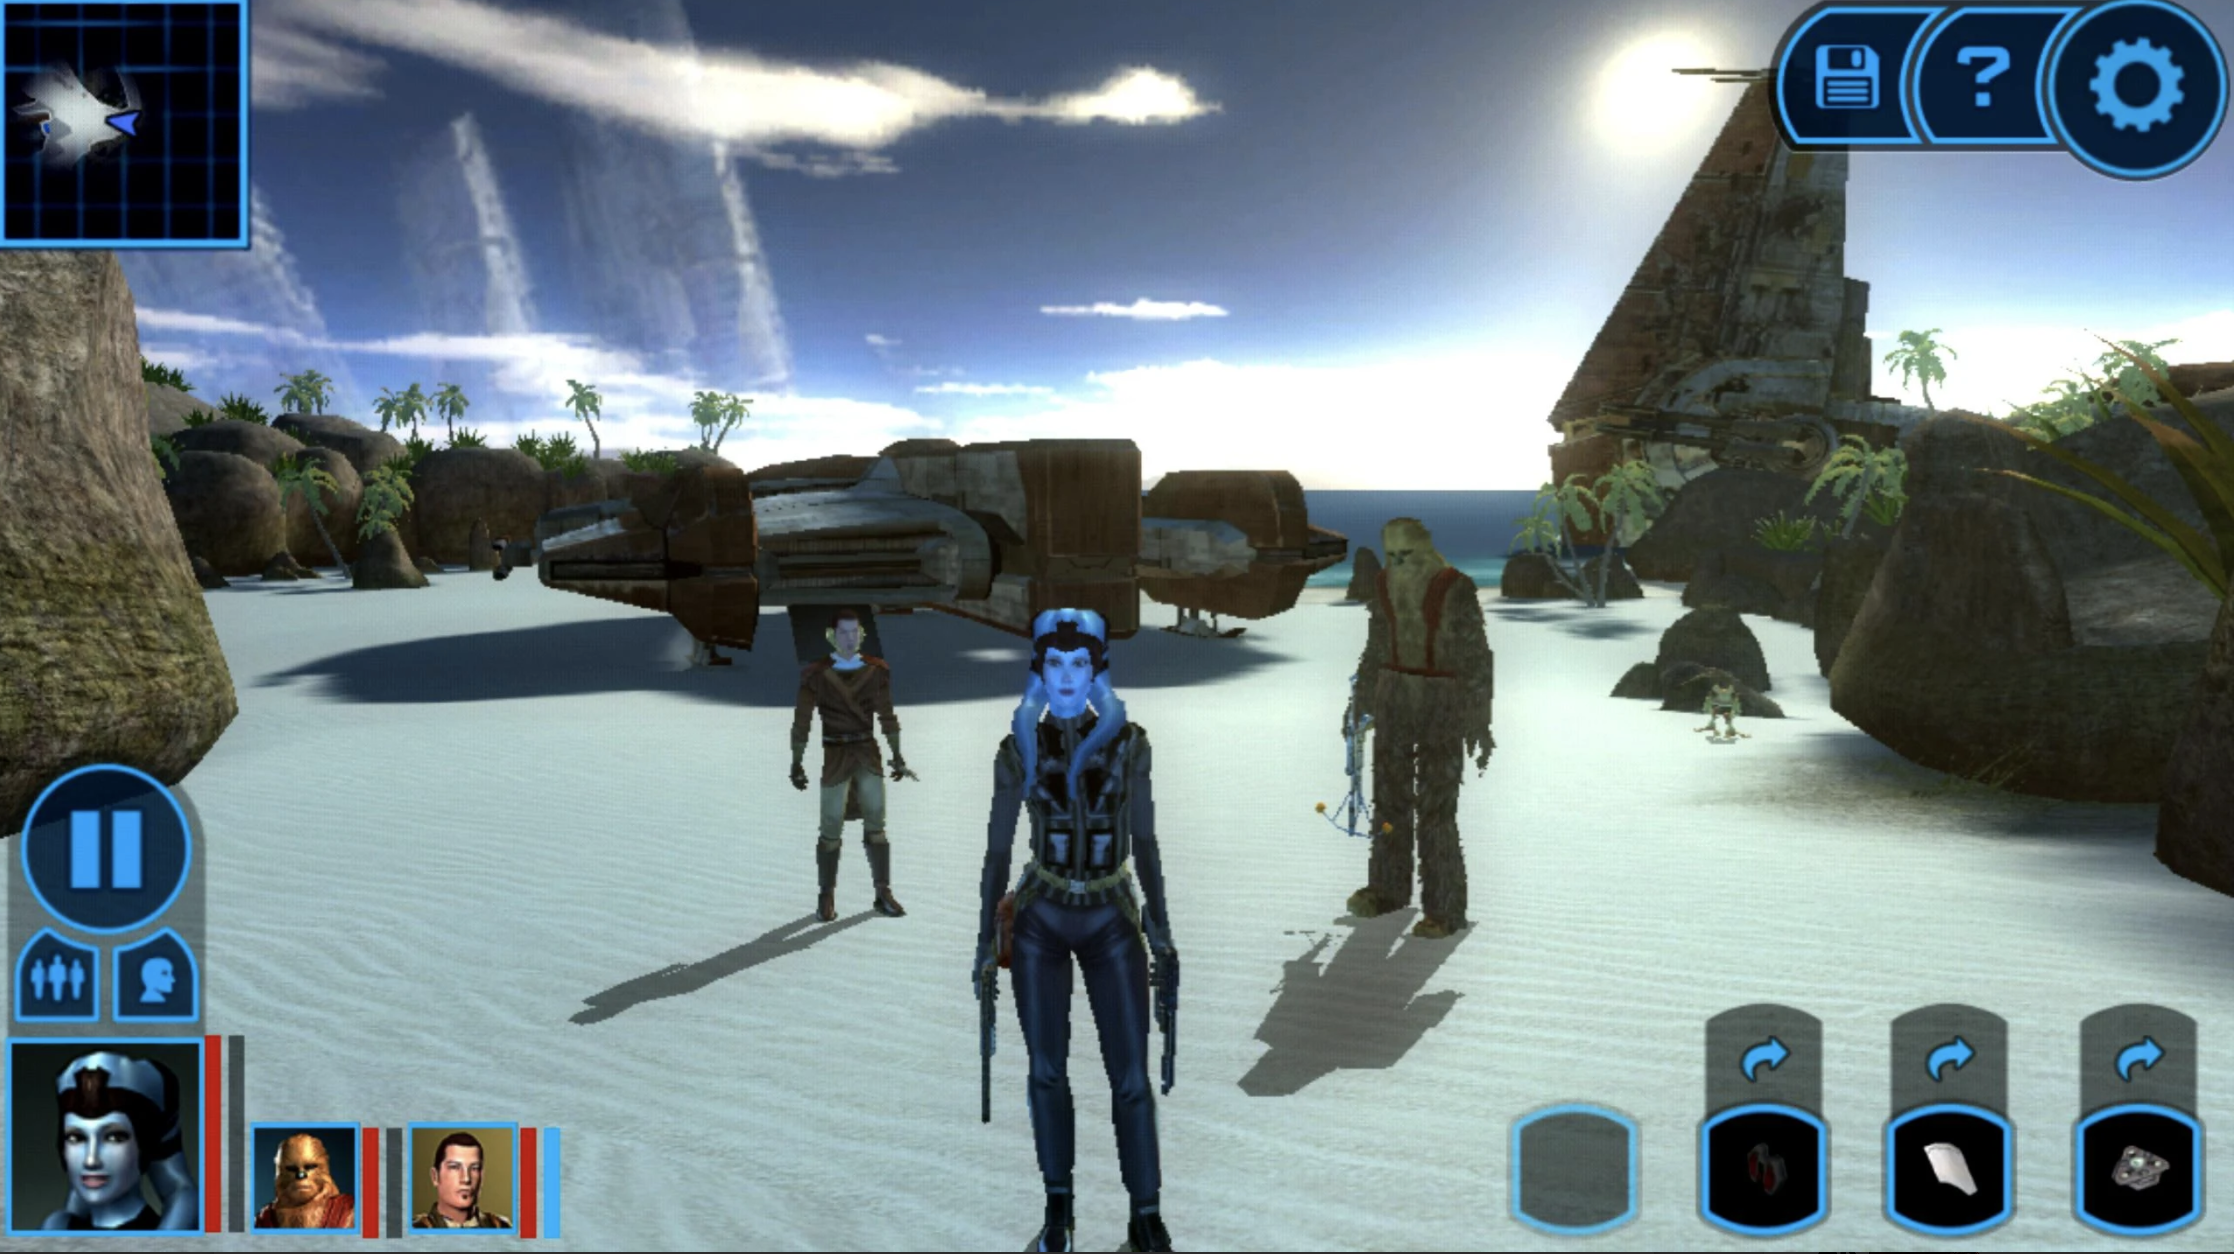 Star Wars KOTR screenshot showing characters and spacecraft